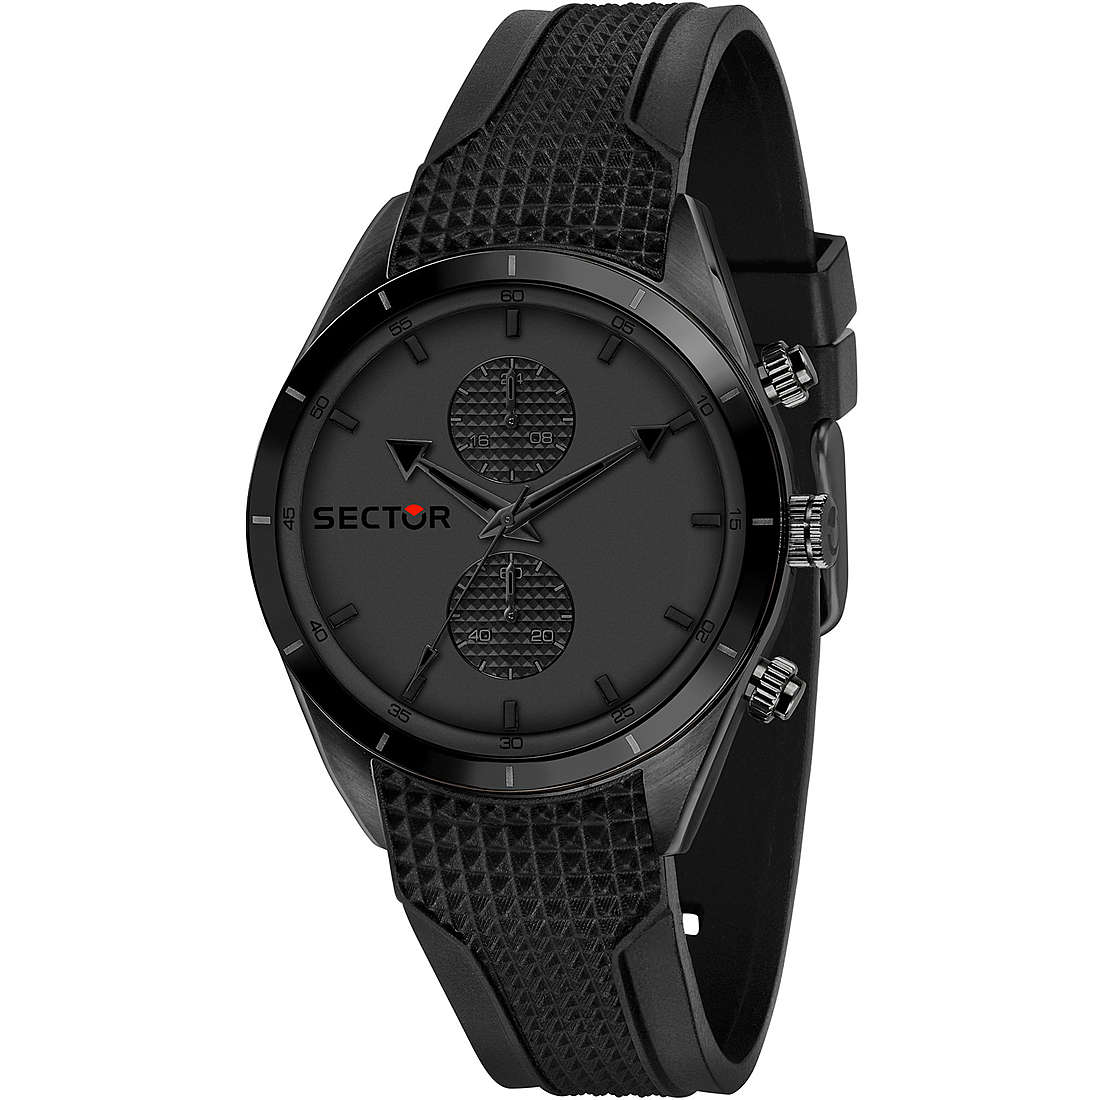 montre multifonction homme Sector 770 R3251516002